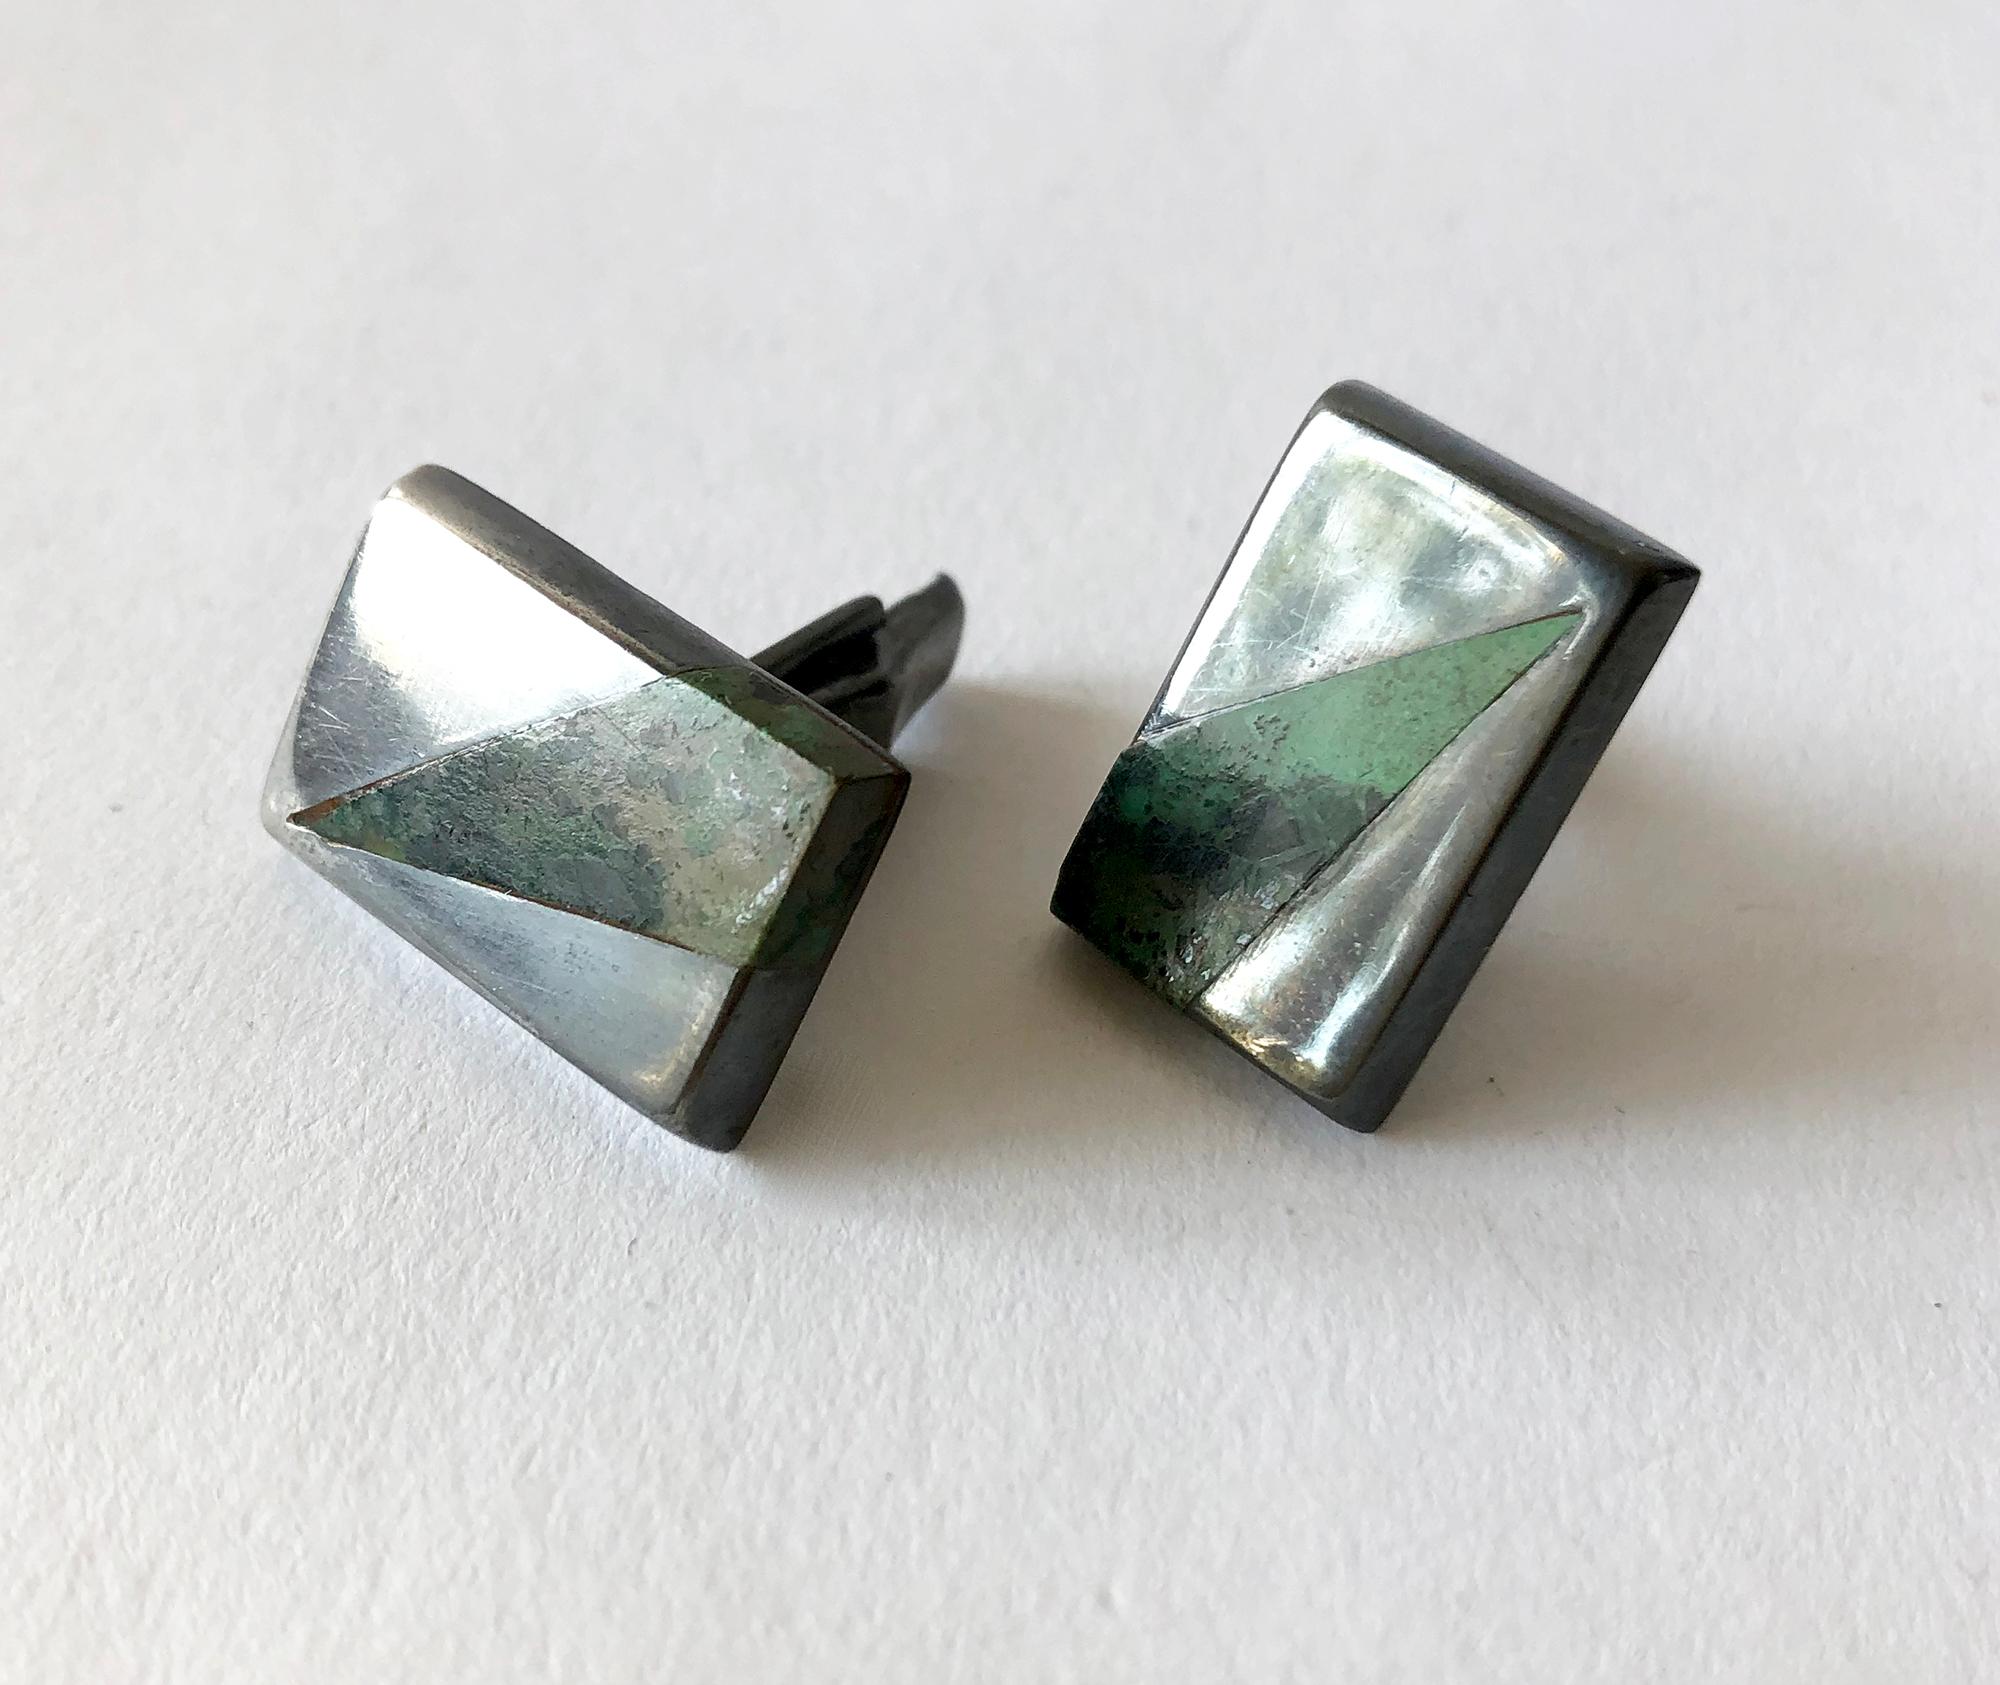 Mexican jade with variegated stone set in darkened sterling silver cufflinks by Enrique Ledesma of Taxco, Mexico.  Cufflinks measure 5/8